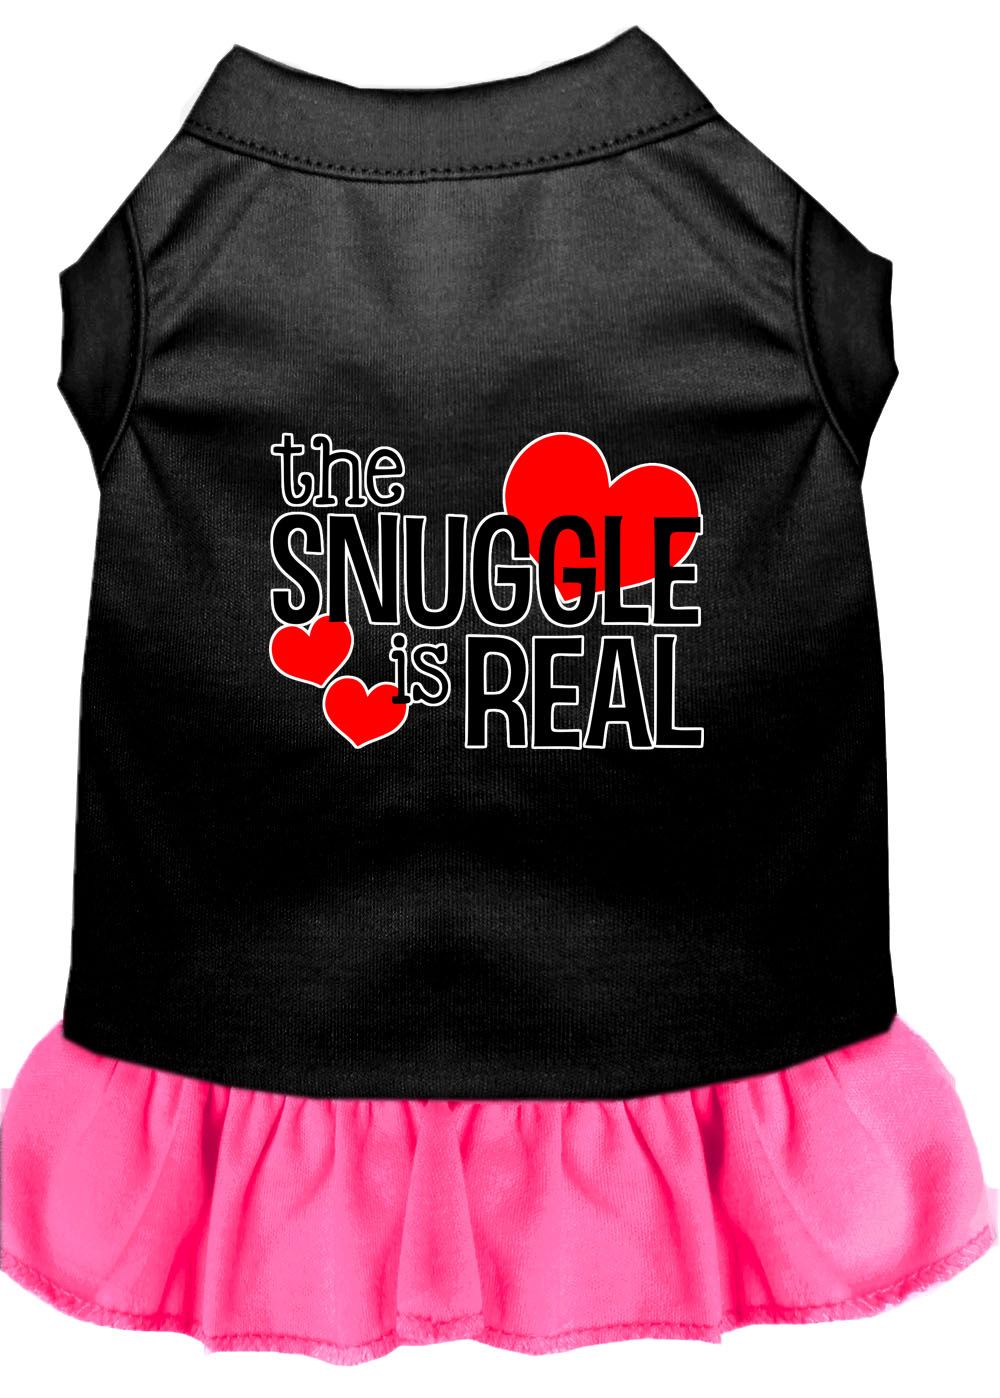 The Snuggle is Real Screen Print Dog Dress Black with Bright Pink Med